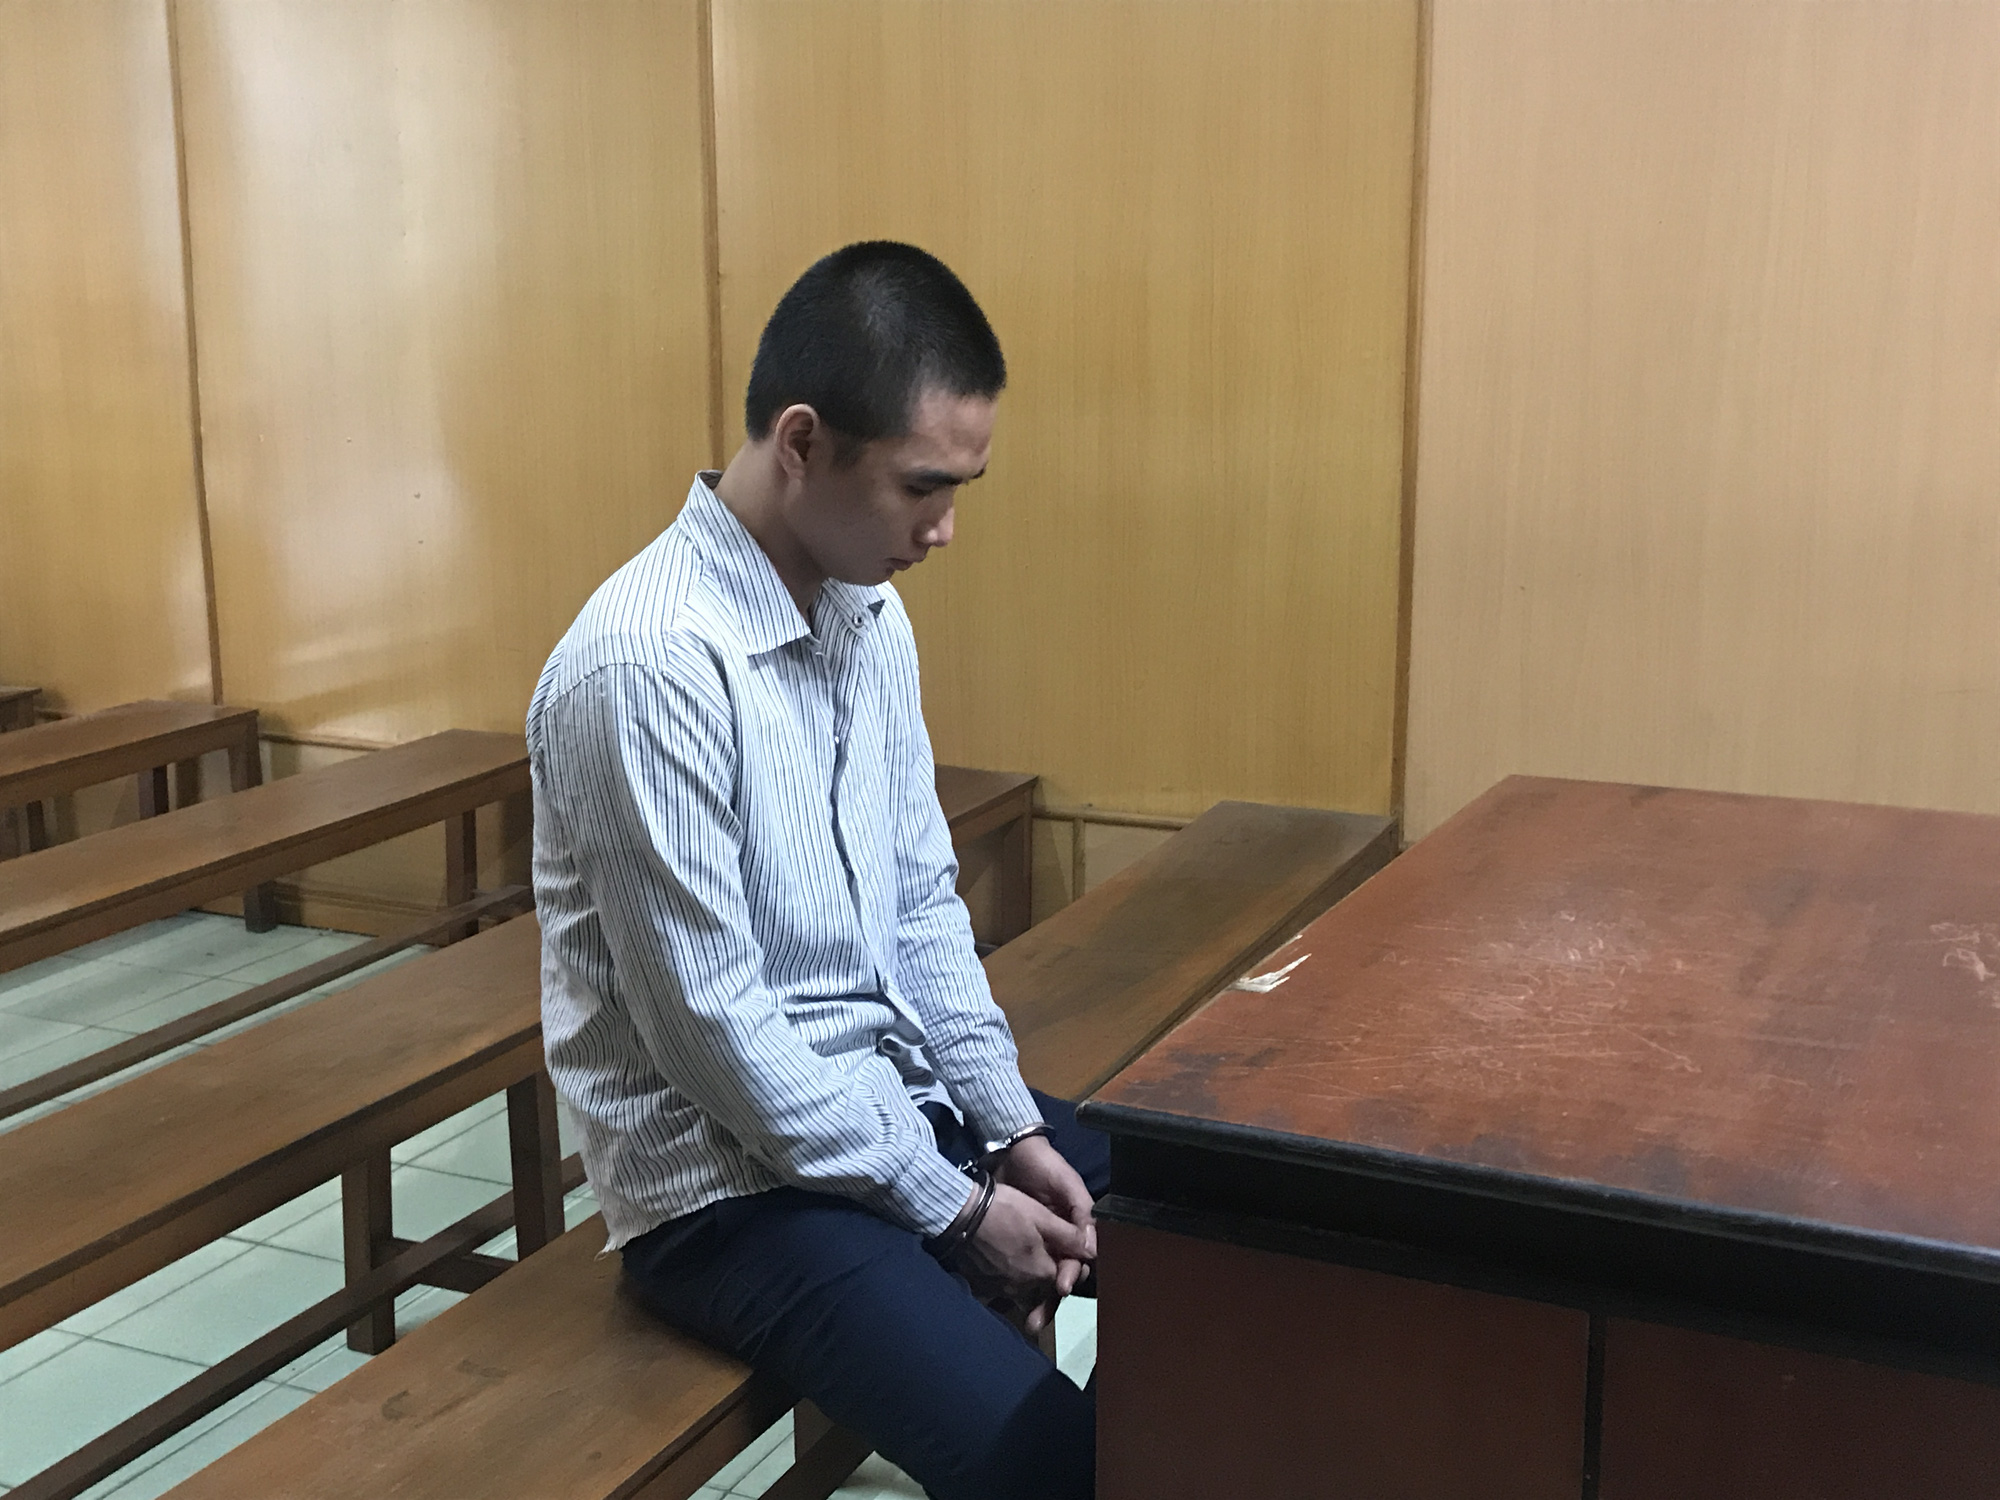 Man sentenced to death for murdering, robbing GrabBike driver in Ho Chi Minh City